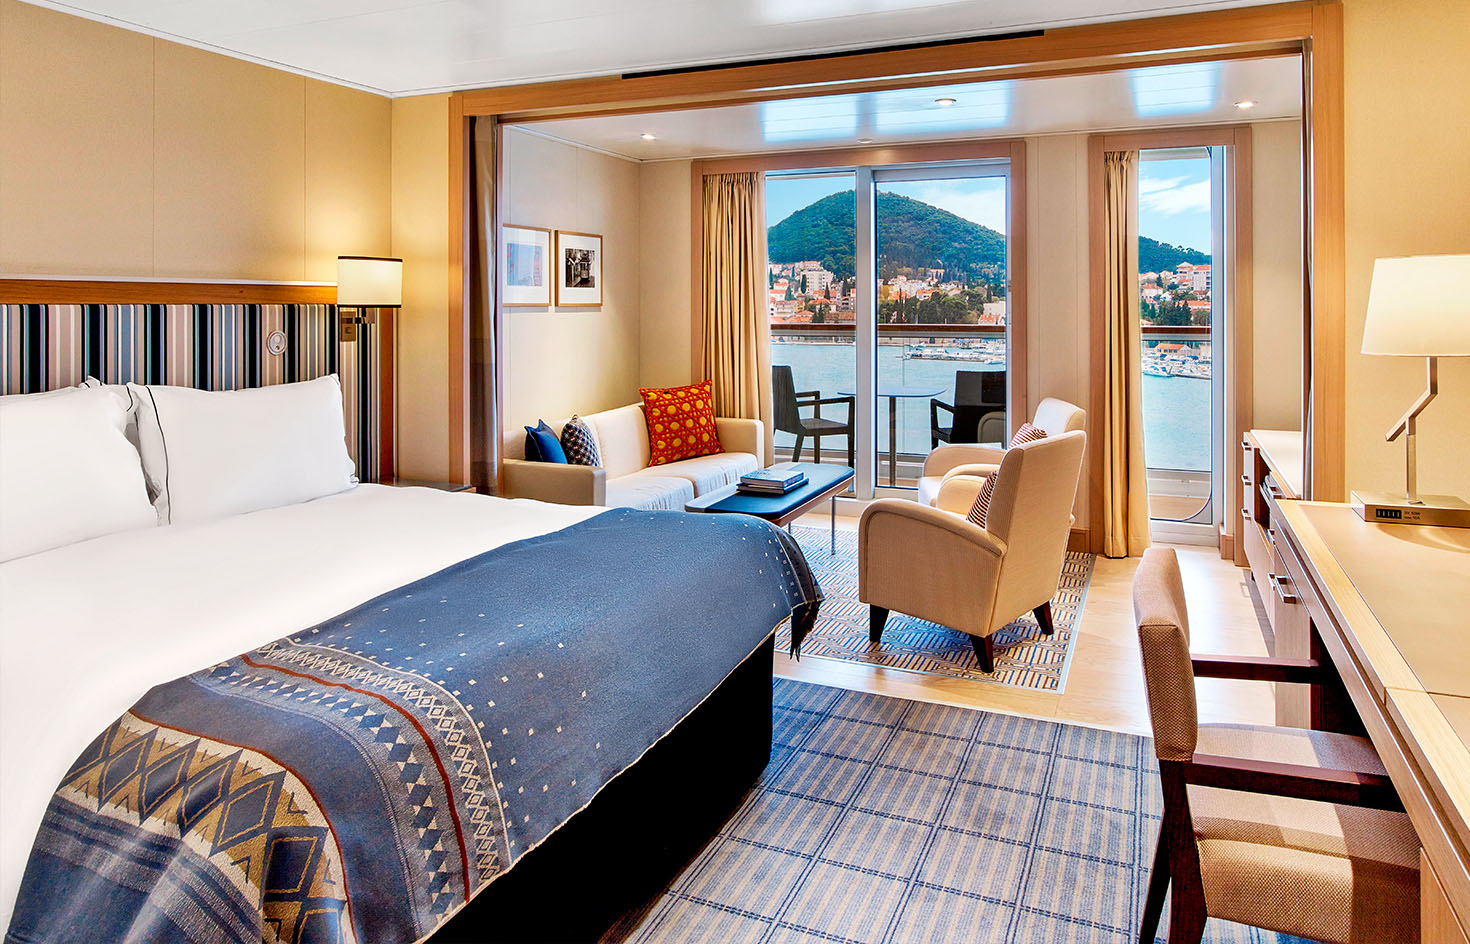 Image sourced from the Viking Cruises' website at: https://www.google.com/url?sa=i&url=https%3A%2F%2Fwww.vikingcruisescanada.com%2Foceans%2Fwhy-viking%2Fviking-difference%2Fall-veranda-staterooms-and-suites.html&psig=AOvVaw1u-zr1RPWybRyu8BfsojZM&ust=1669810364222000&source=images&cd=vfe&ved=0CBAQjRxqFwoTCMCp2b-u0_sCFQAAAAAdAAAAABAE